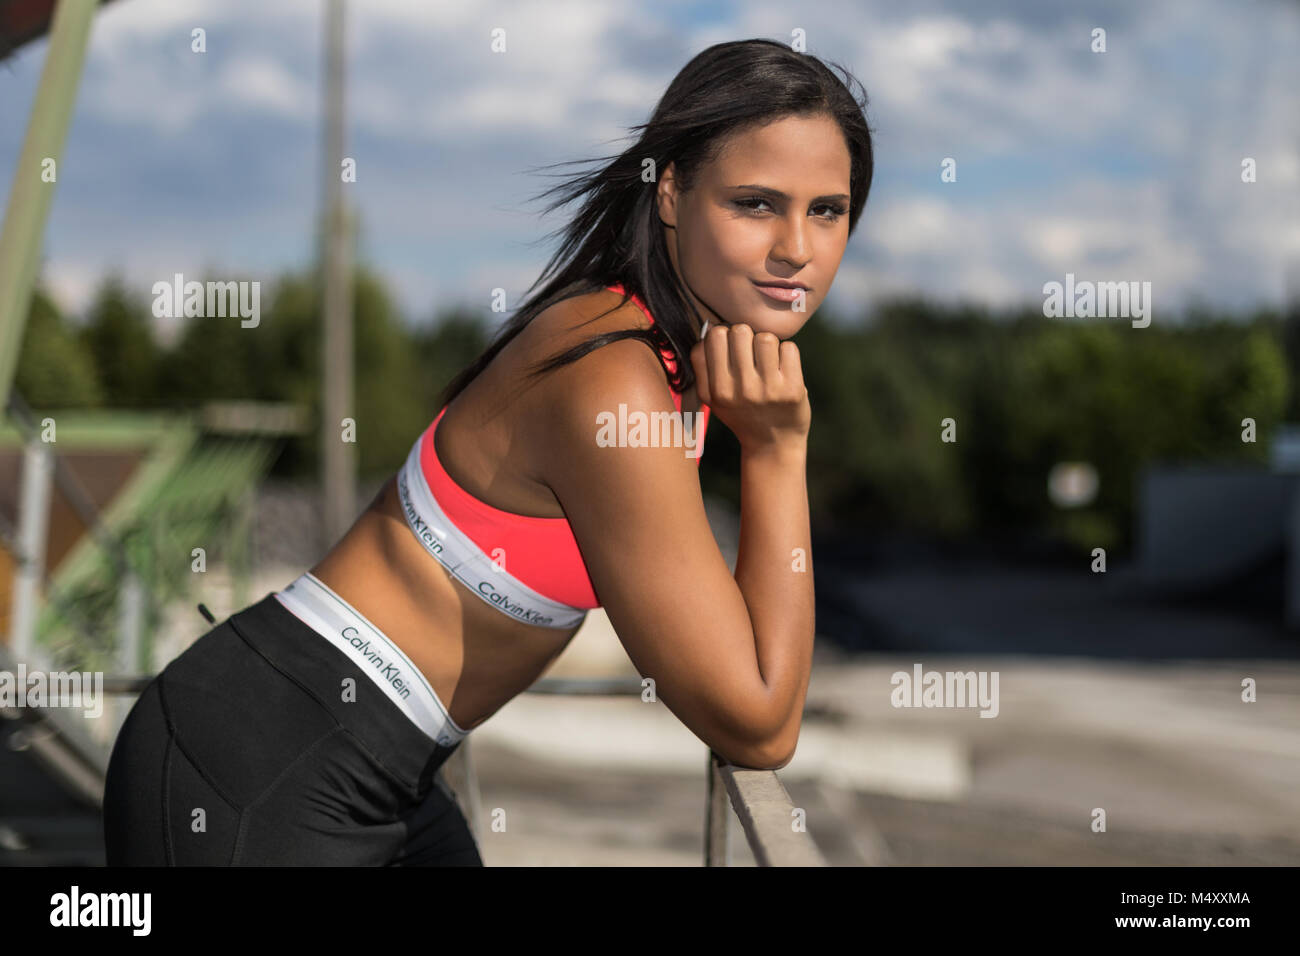 Young woman in sporty outfit Stock Photo